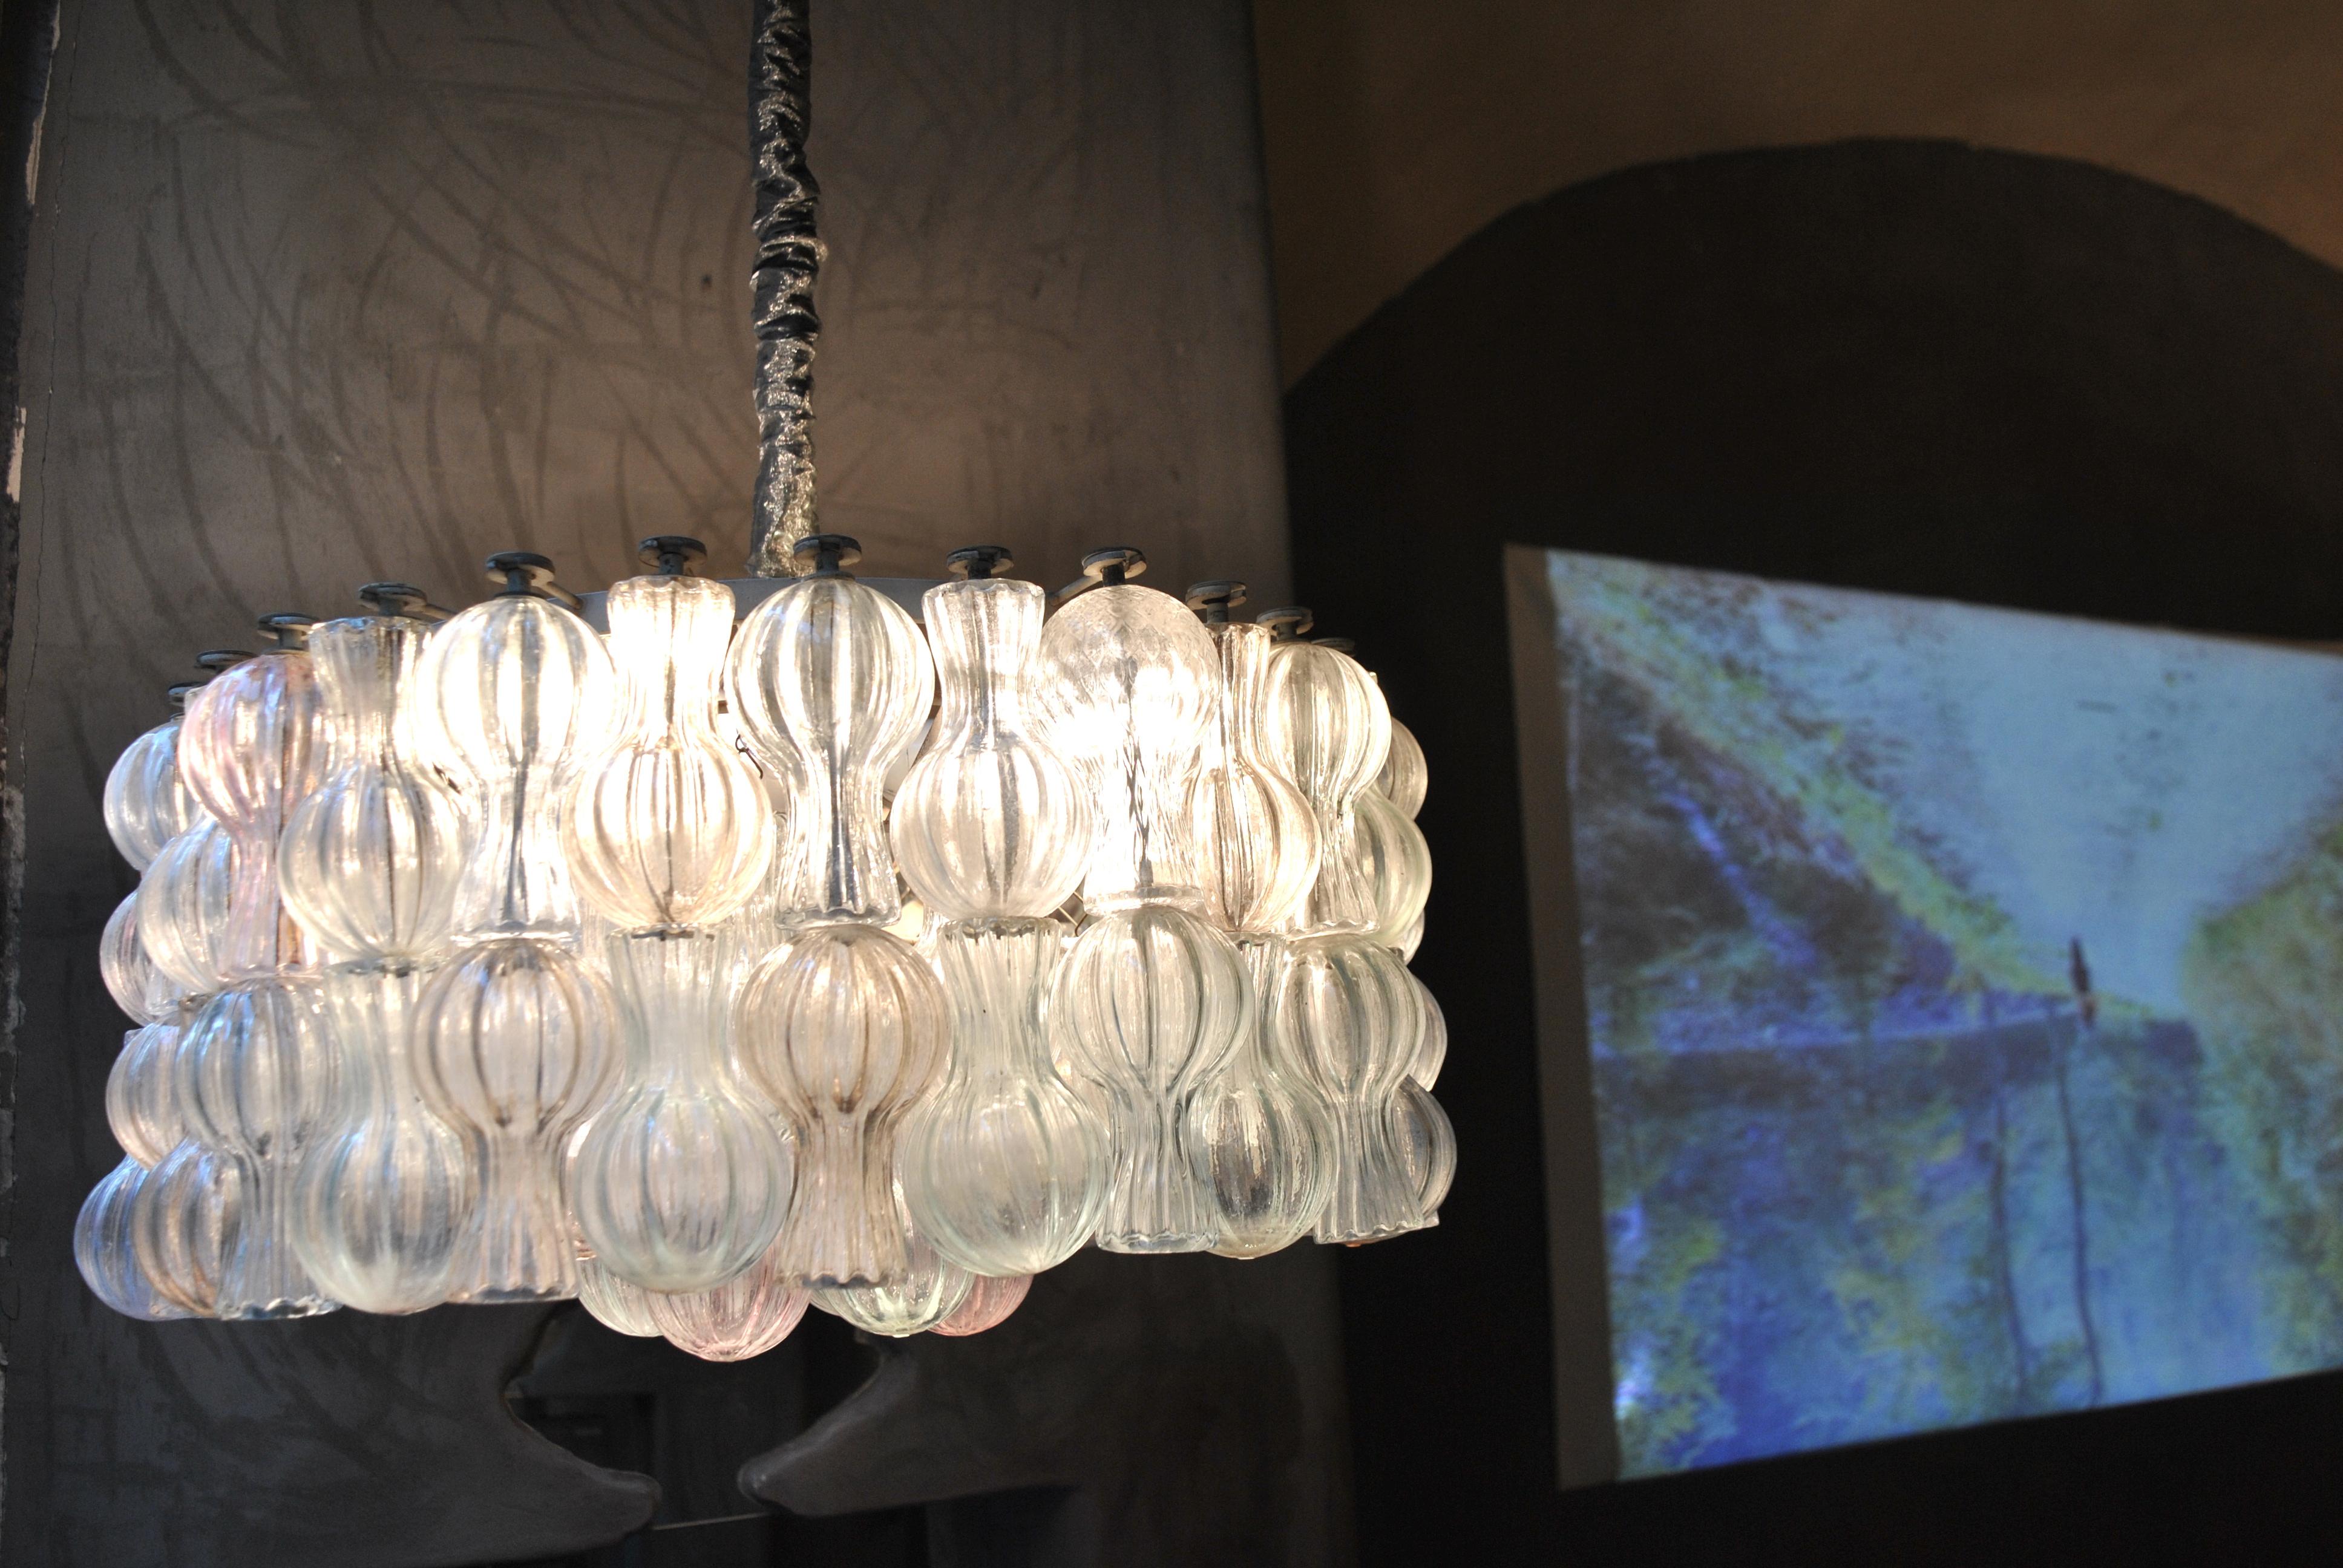 Mid-Century Modern Suspension Chandelier by Seguso Murano Glass from the 1950s